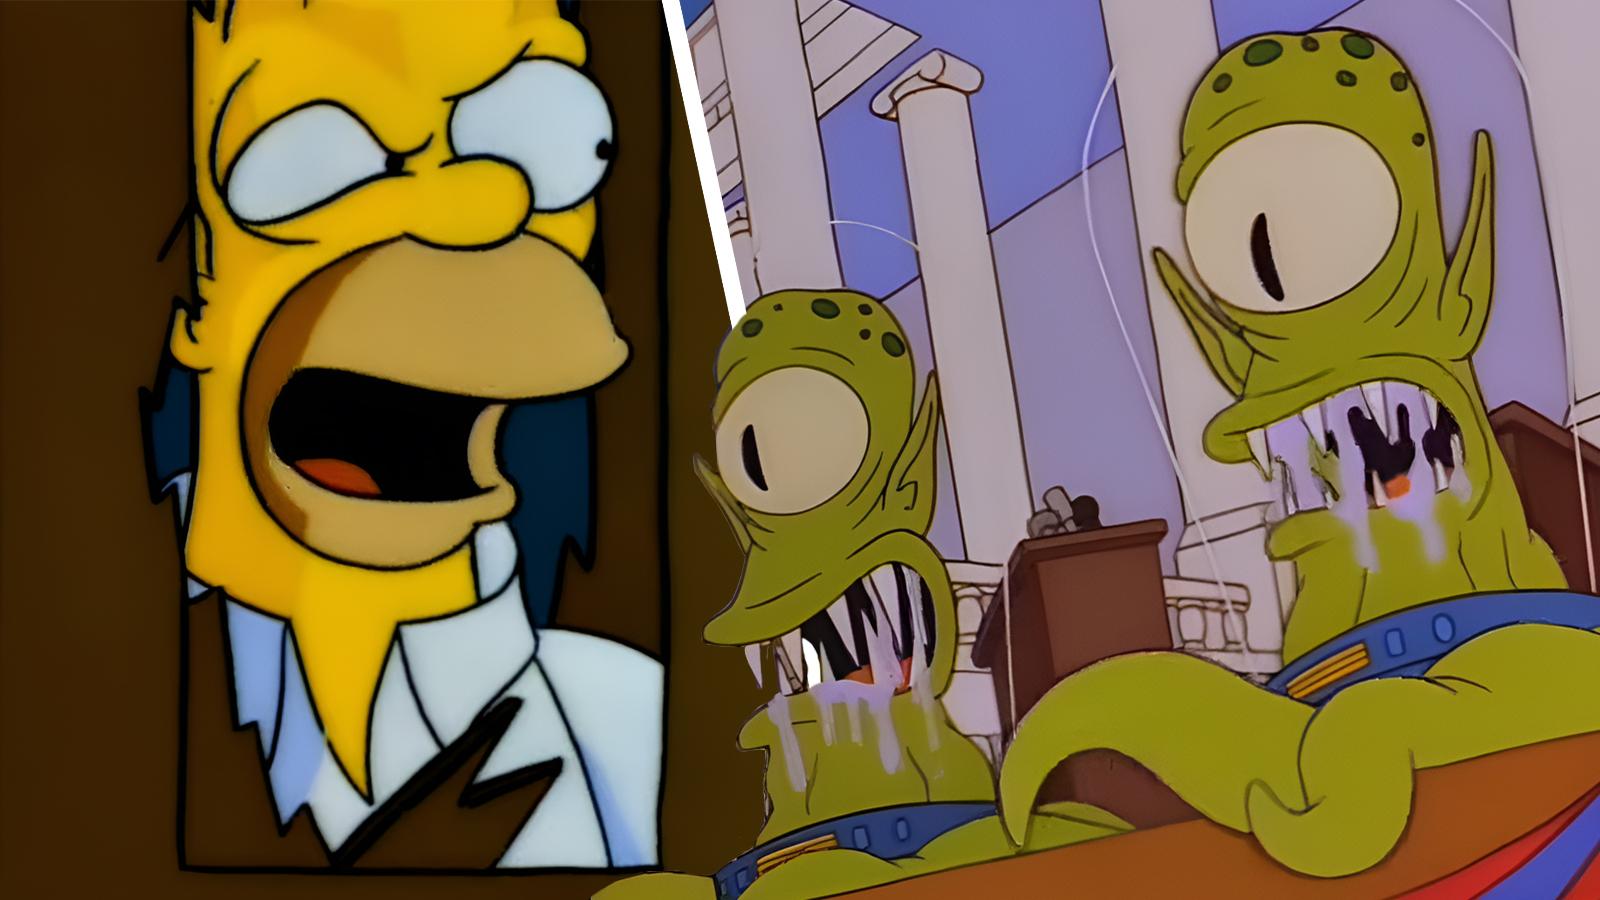 The Simpsons' new Treehouse of Horror episode is going full anime